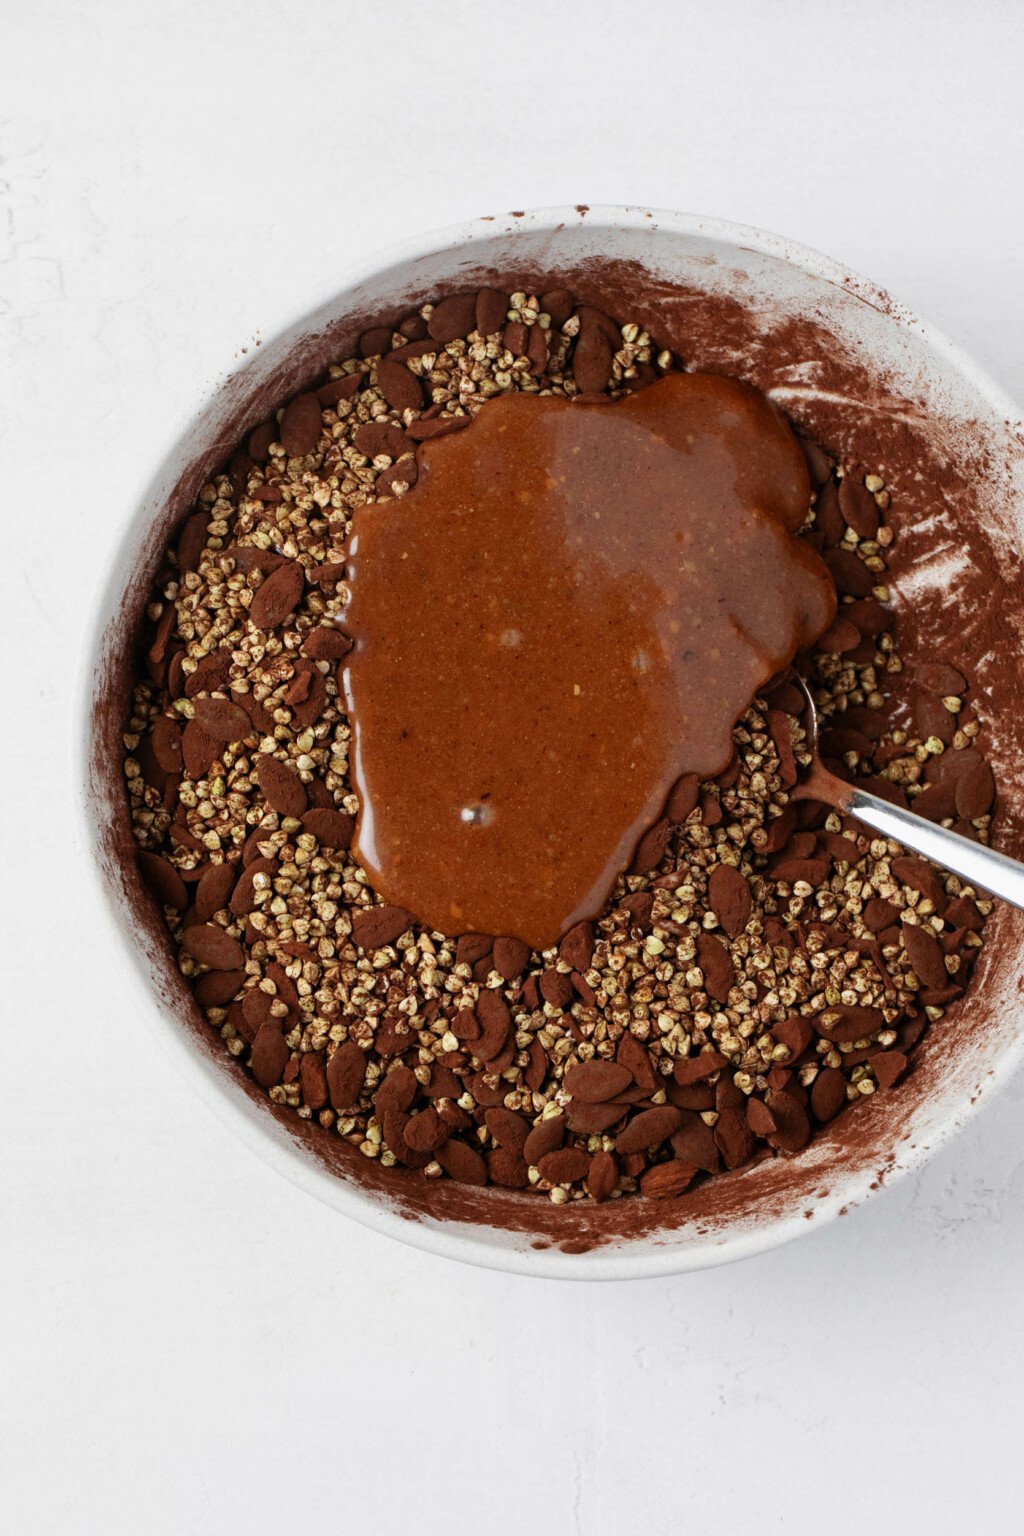 A mixing bowl is pictured overhead. It's filled with buckwheat groats and nut butter, along with cocoa powder.